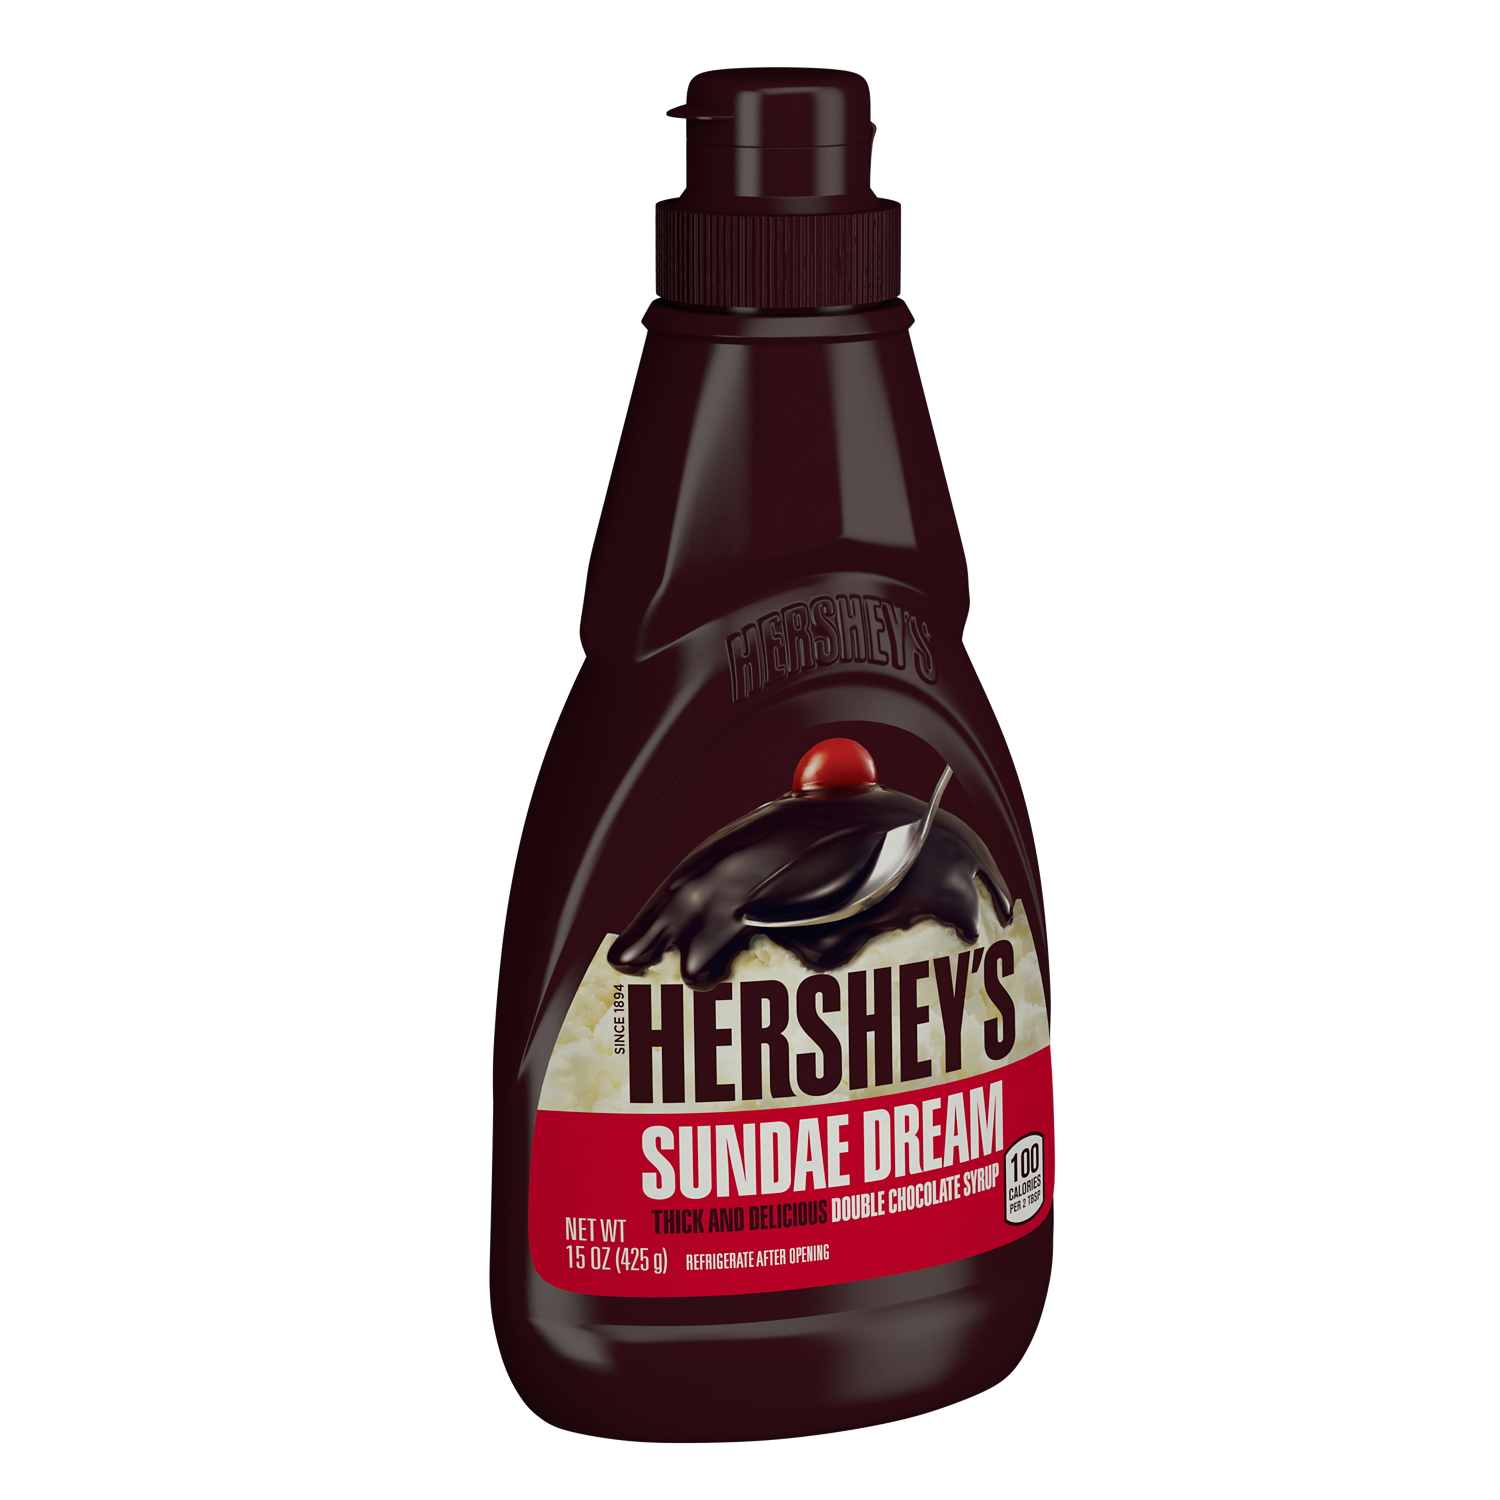 HERSHEY'S SUNDAE DREAM Double Chocolate Syrup, 15 oz bottle - Left Side of Package